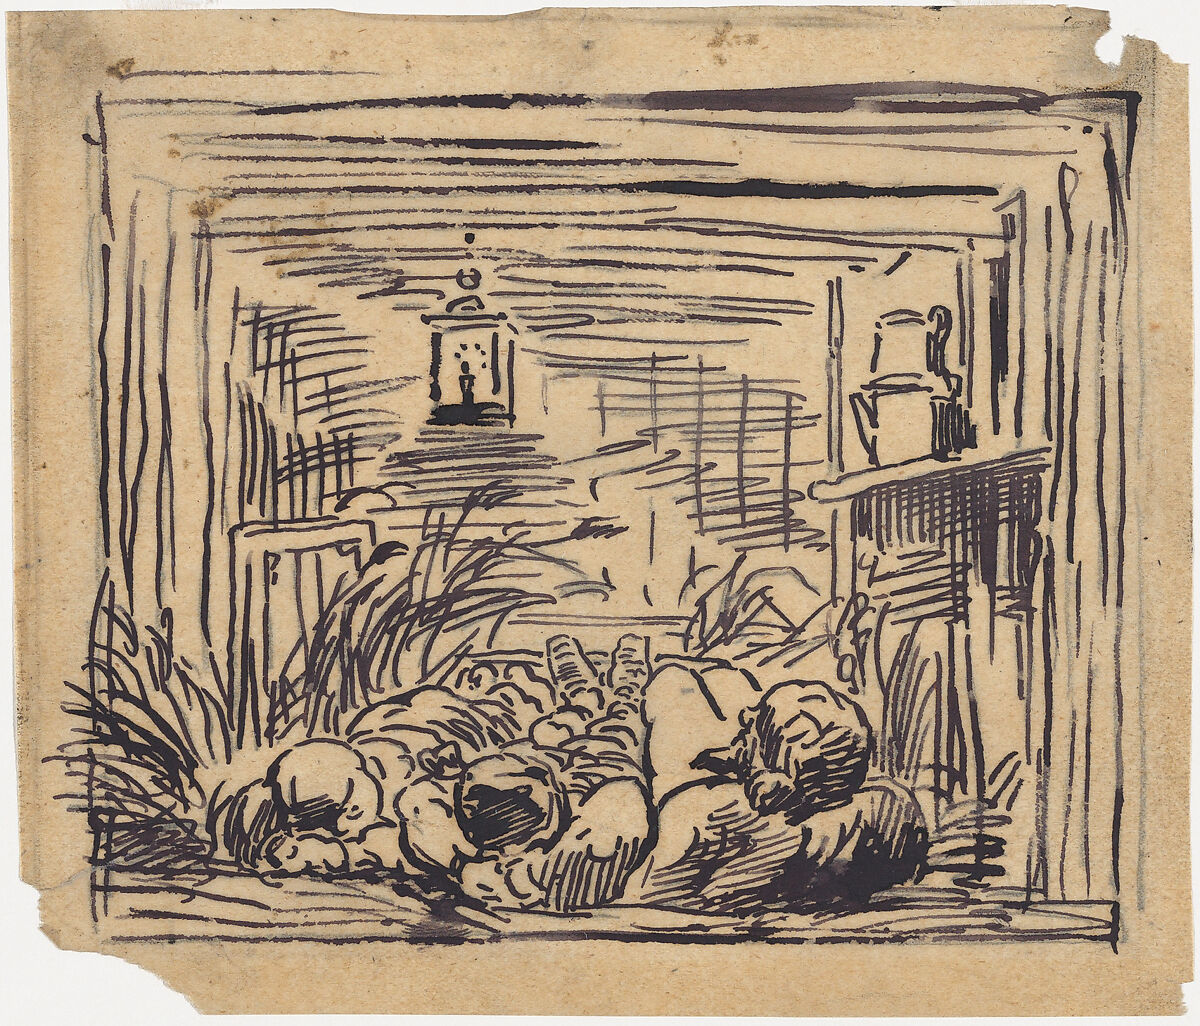 Bedding Down Aboard the Botin or Night on the Boat, Charles-François Daubigny (French, Paris 1817–1878 Paris), Pen and ink on tracing paper, redrawn in graphite on verso 